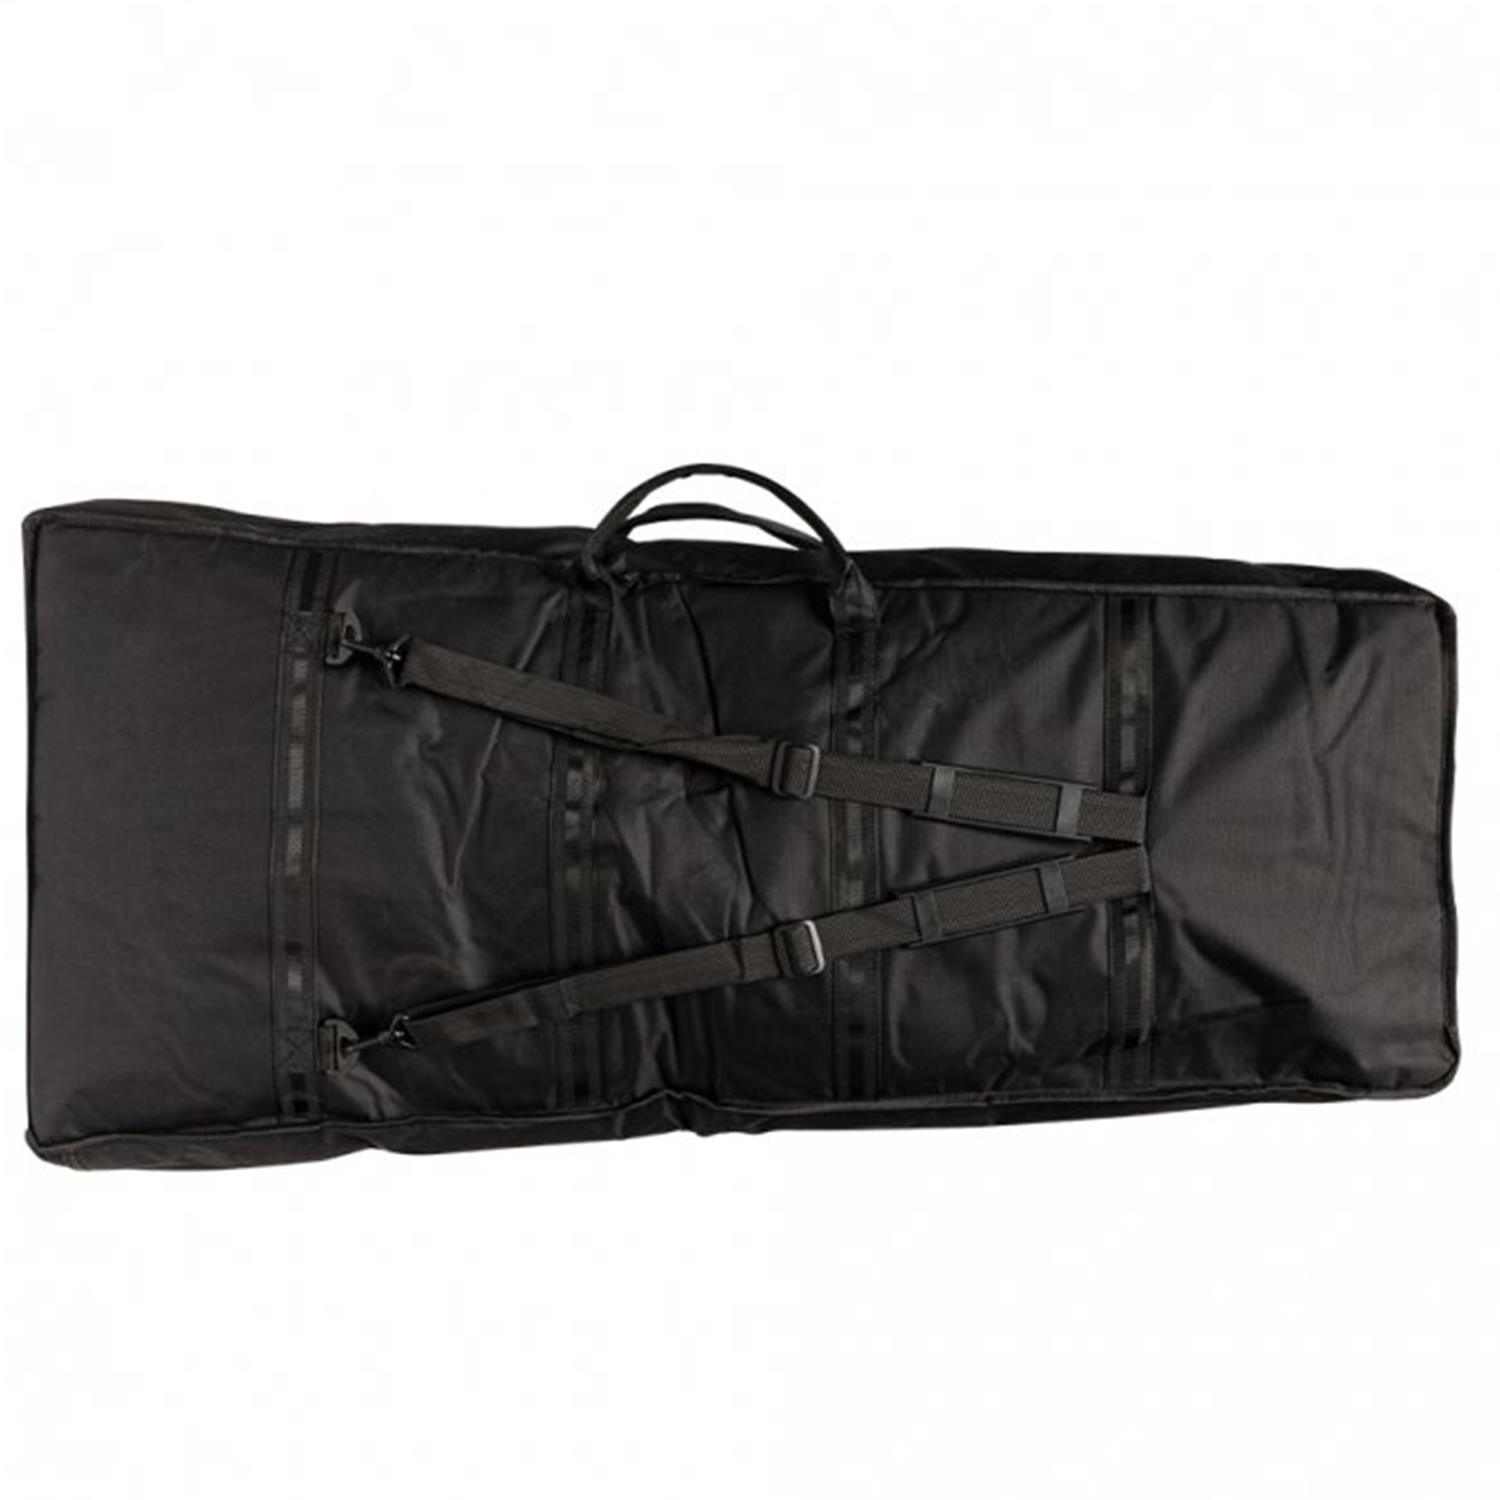 Stagg BAG XYLO-SET 37 Gig Bag for Xylophone Set - DY Pro Audio